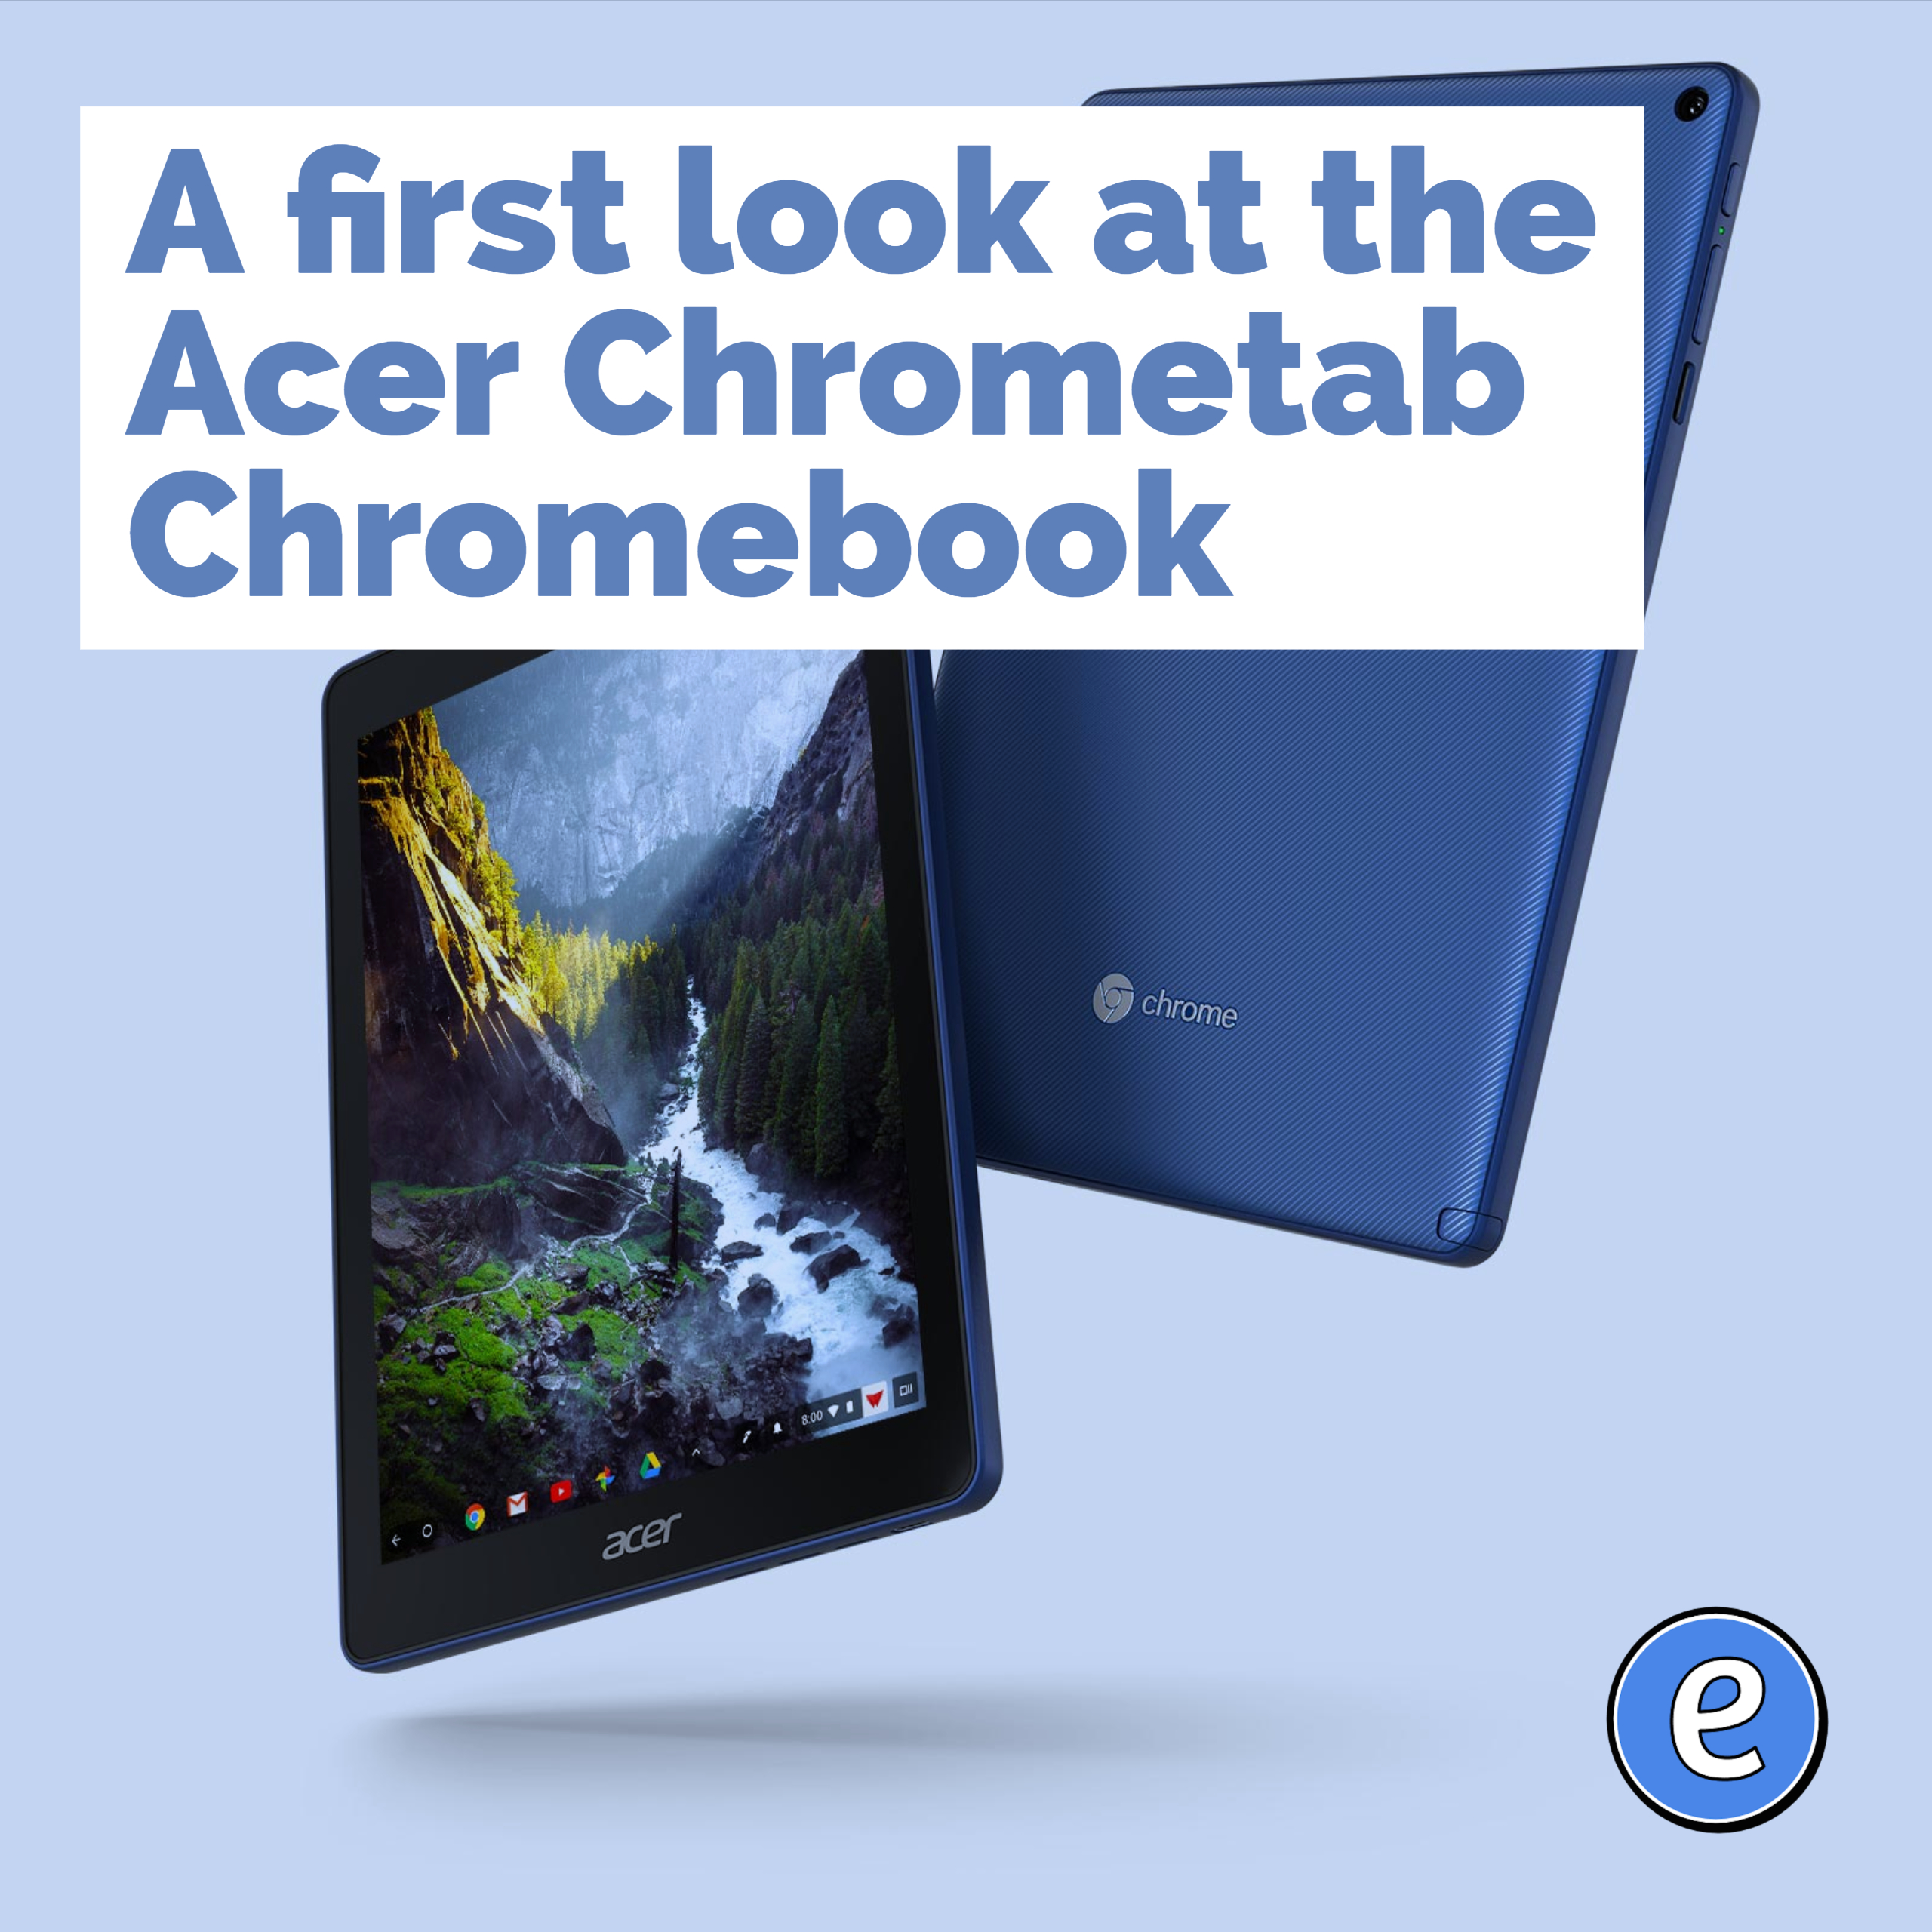 A first look at the Acer Chrometab Chromebook